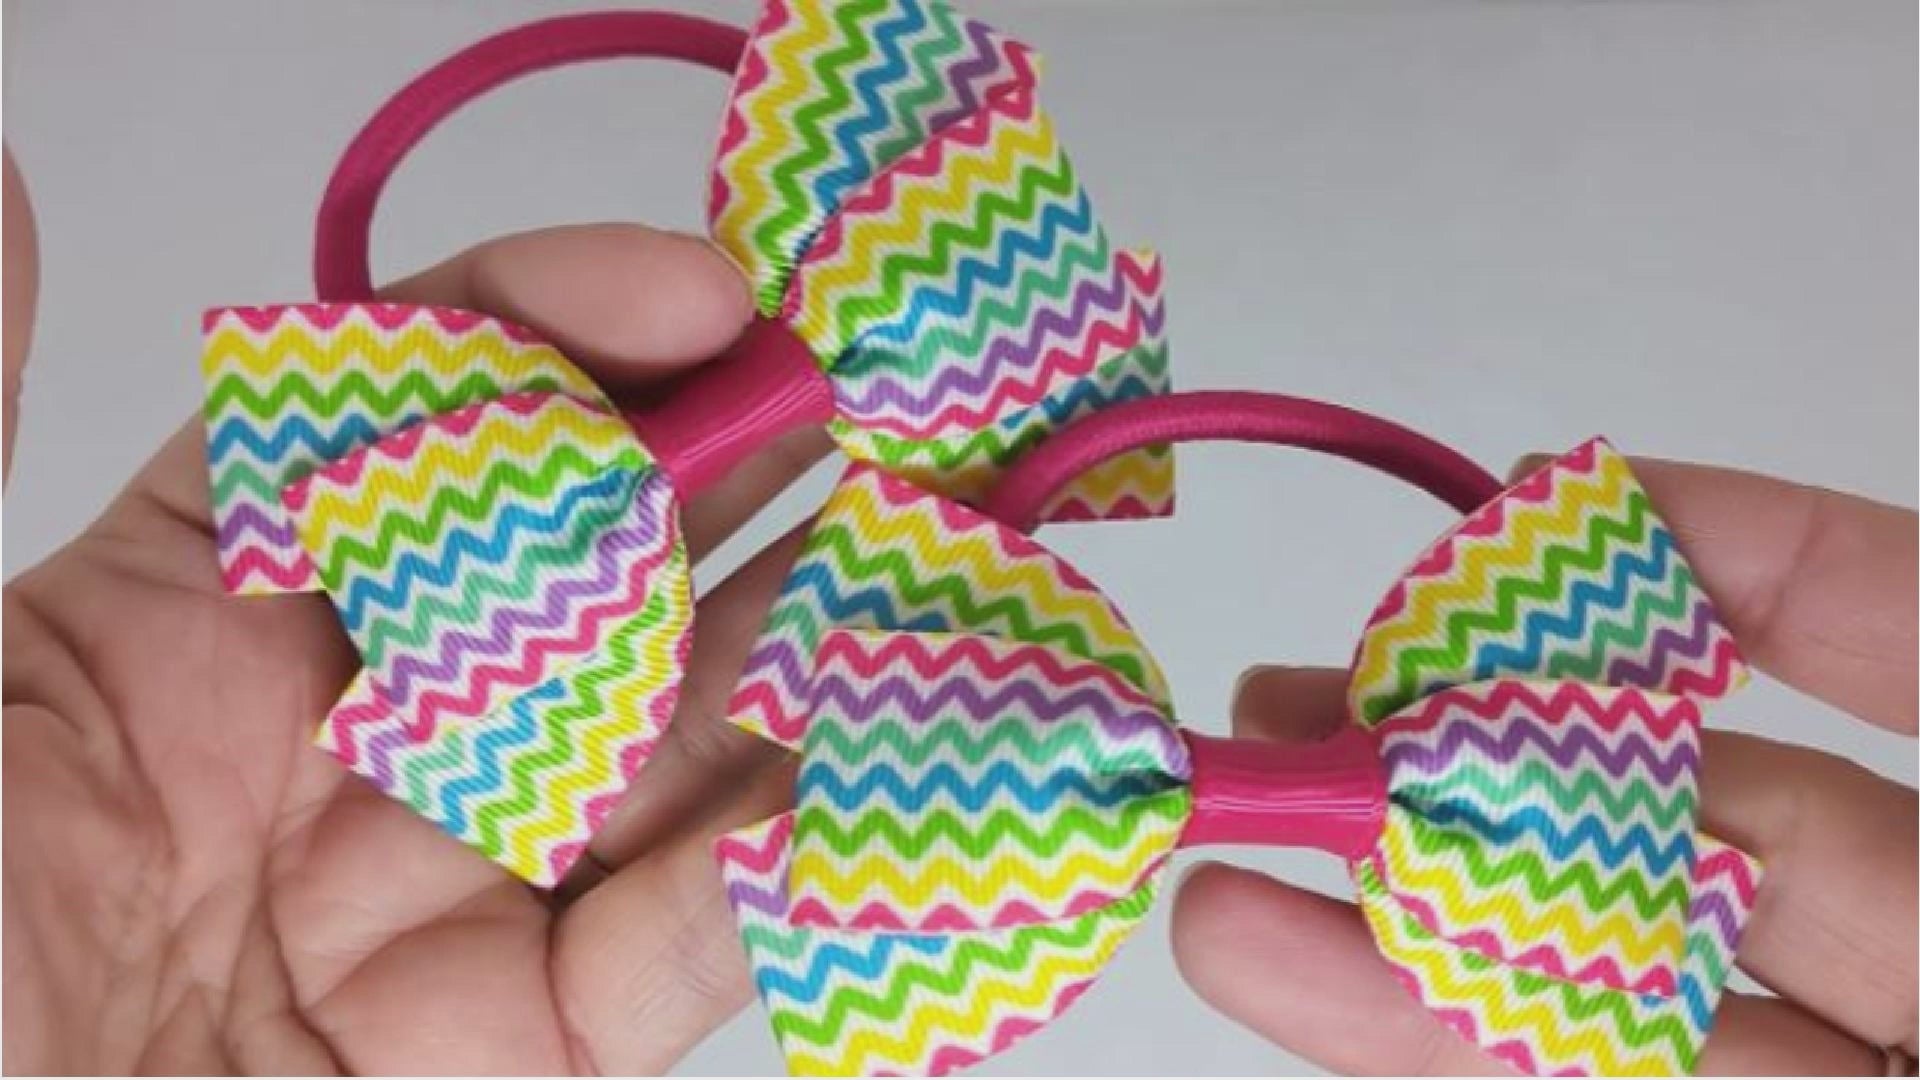 Colourful Chevron Design Hair Bows on Thick Bobbles | Dreambows UK